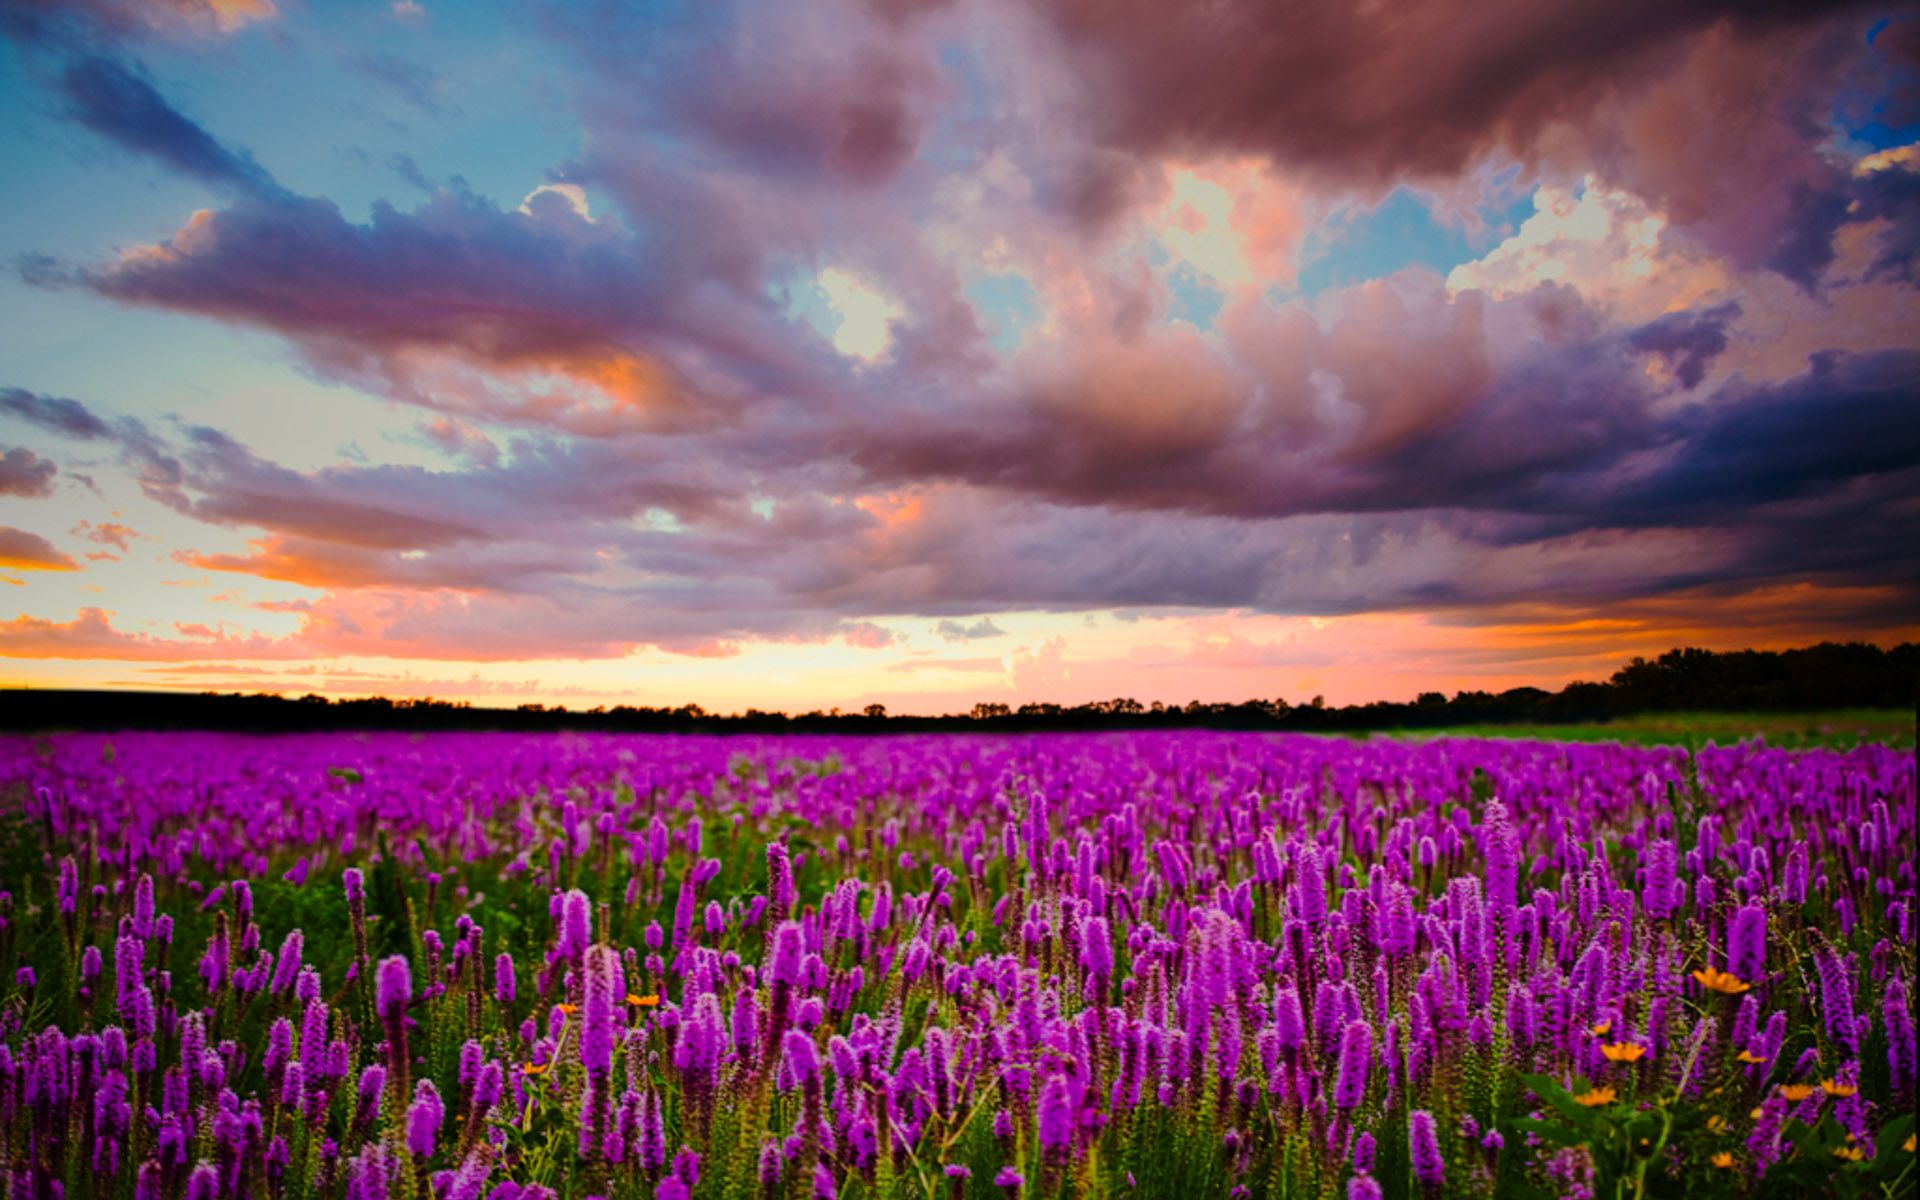 Sunset Field With Purple Flowers Of Lavender Sky With Dark Clouds